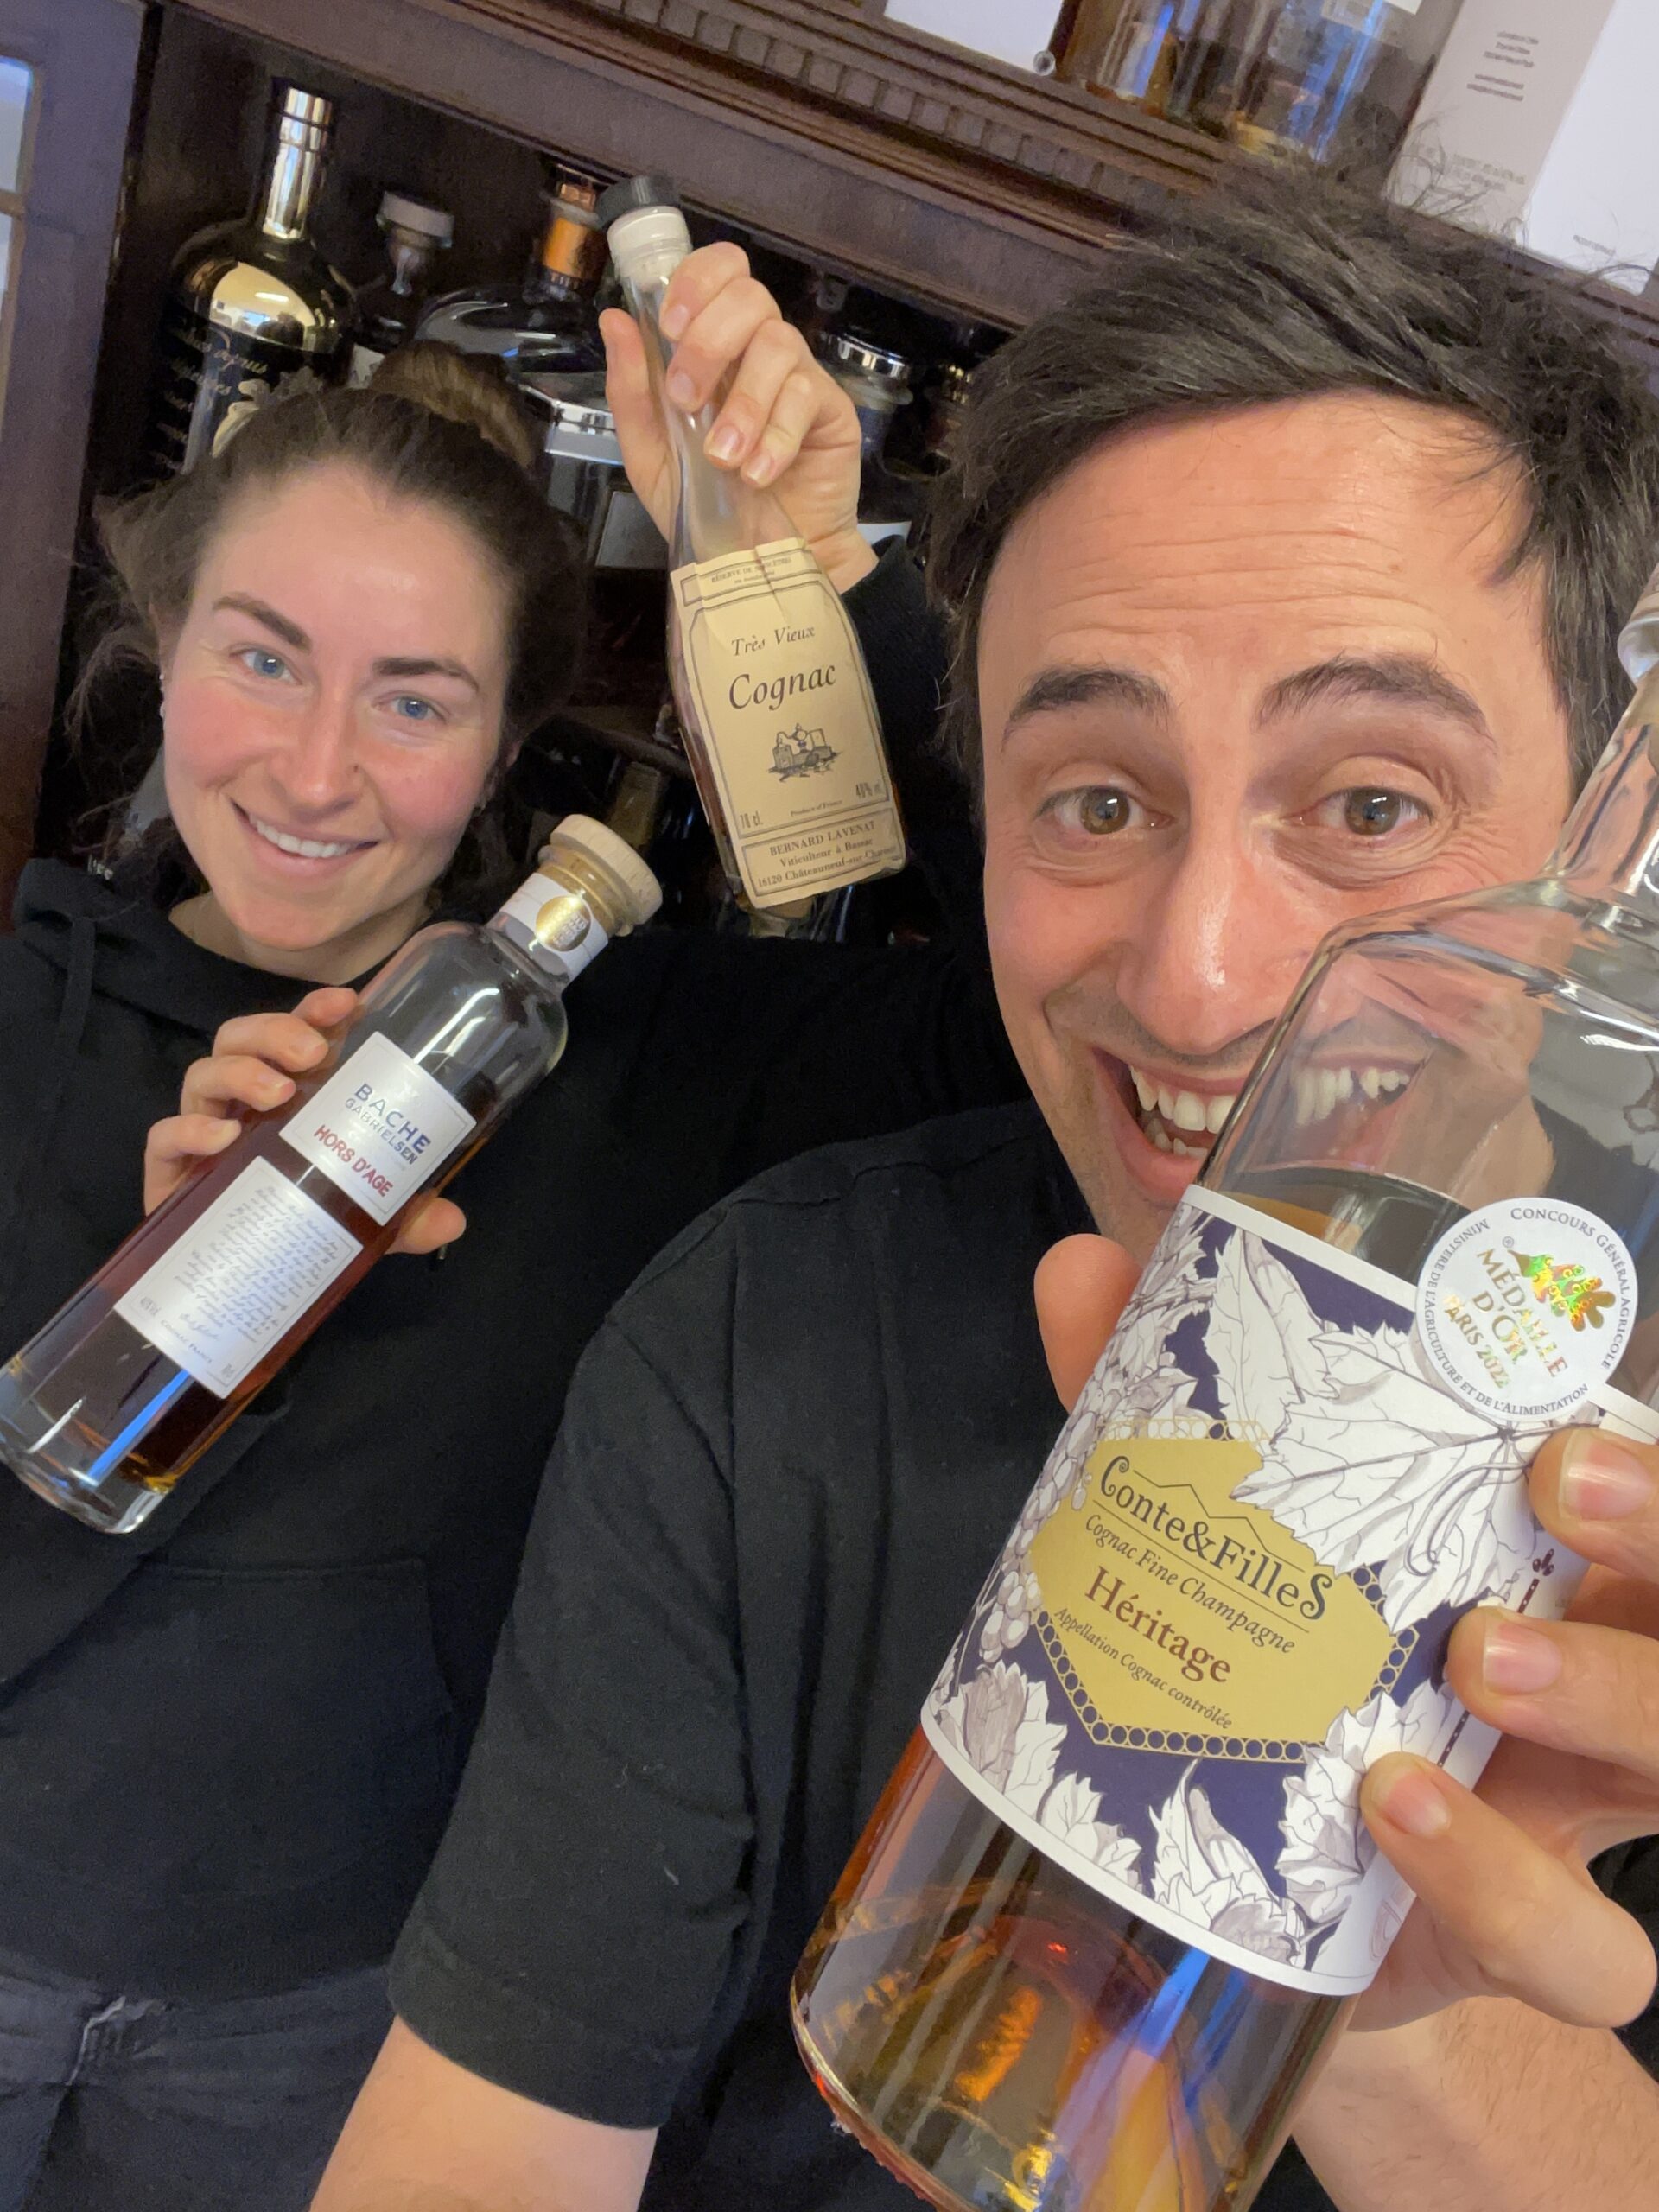 Virginia and Max holding the top 3 winners up of the Cognac Tasting